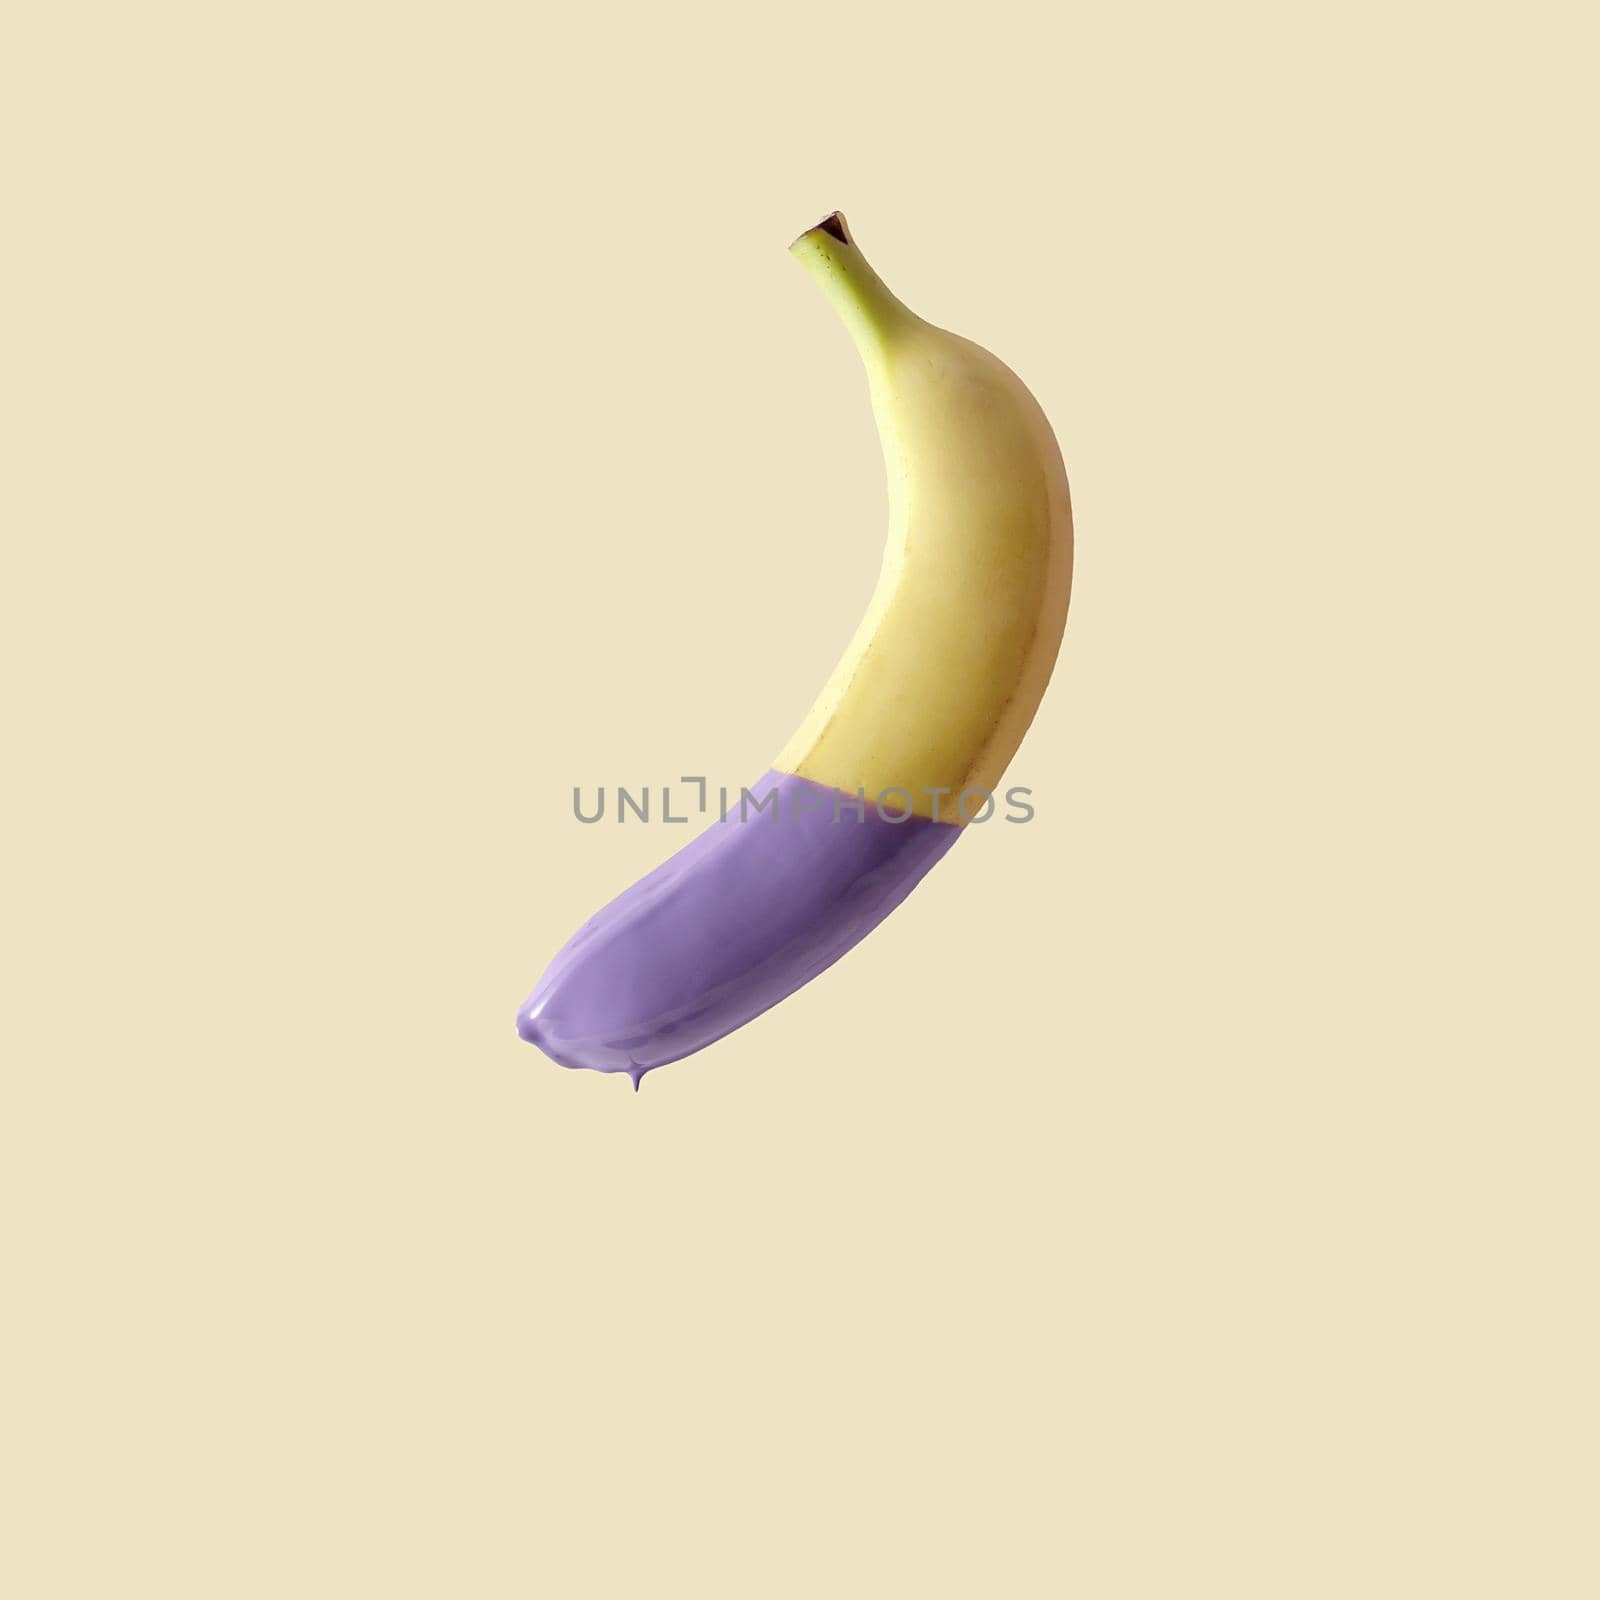 Minimal contemporary concept tropical exotic summer banana in purple paint. Banana in paint on a yellow background.